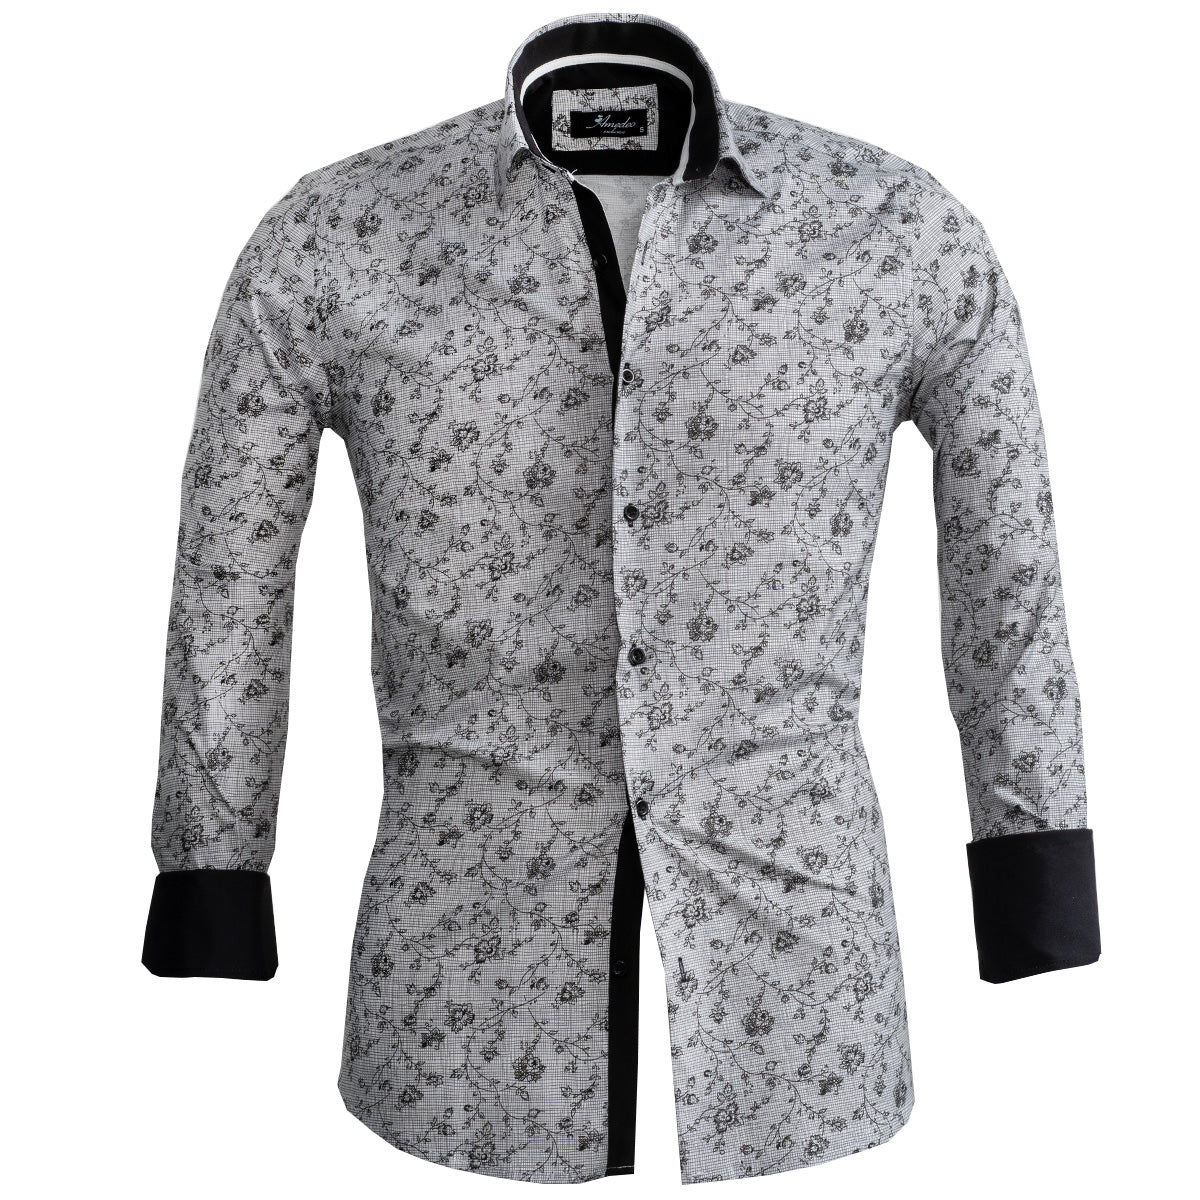 Light Blue Paisley Mens SliBlack and WhiteMens Slim Fit French Cuff Shirts with Cufflink Holes - Casual and Formalm Fit Designer French Cuff Shirt - Tailored Cotton Shirts For Work And Casual